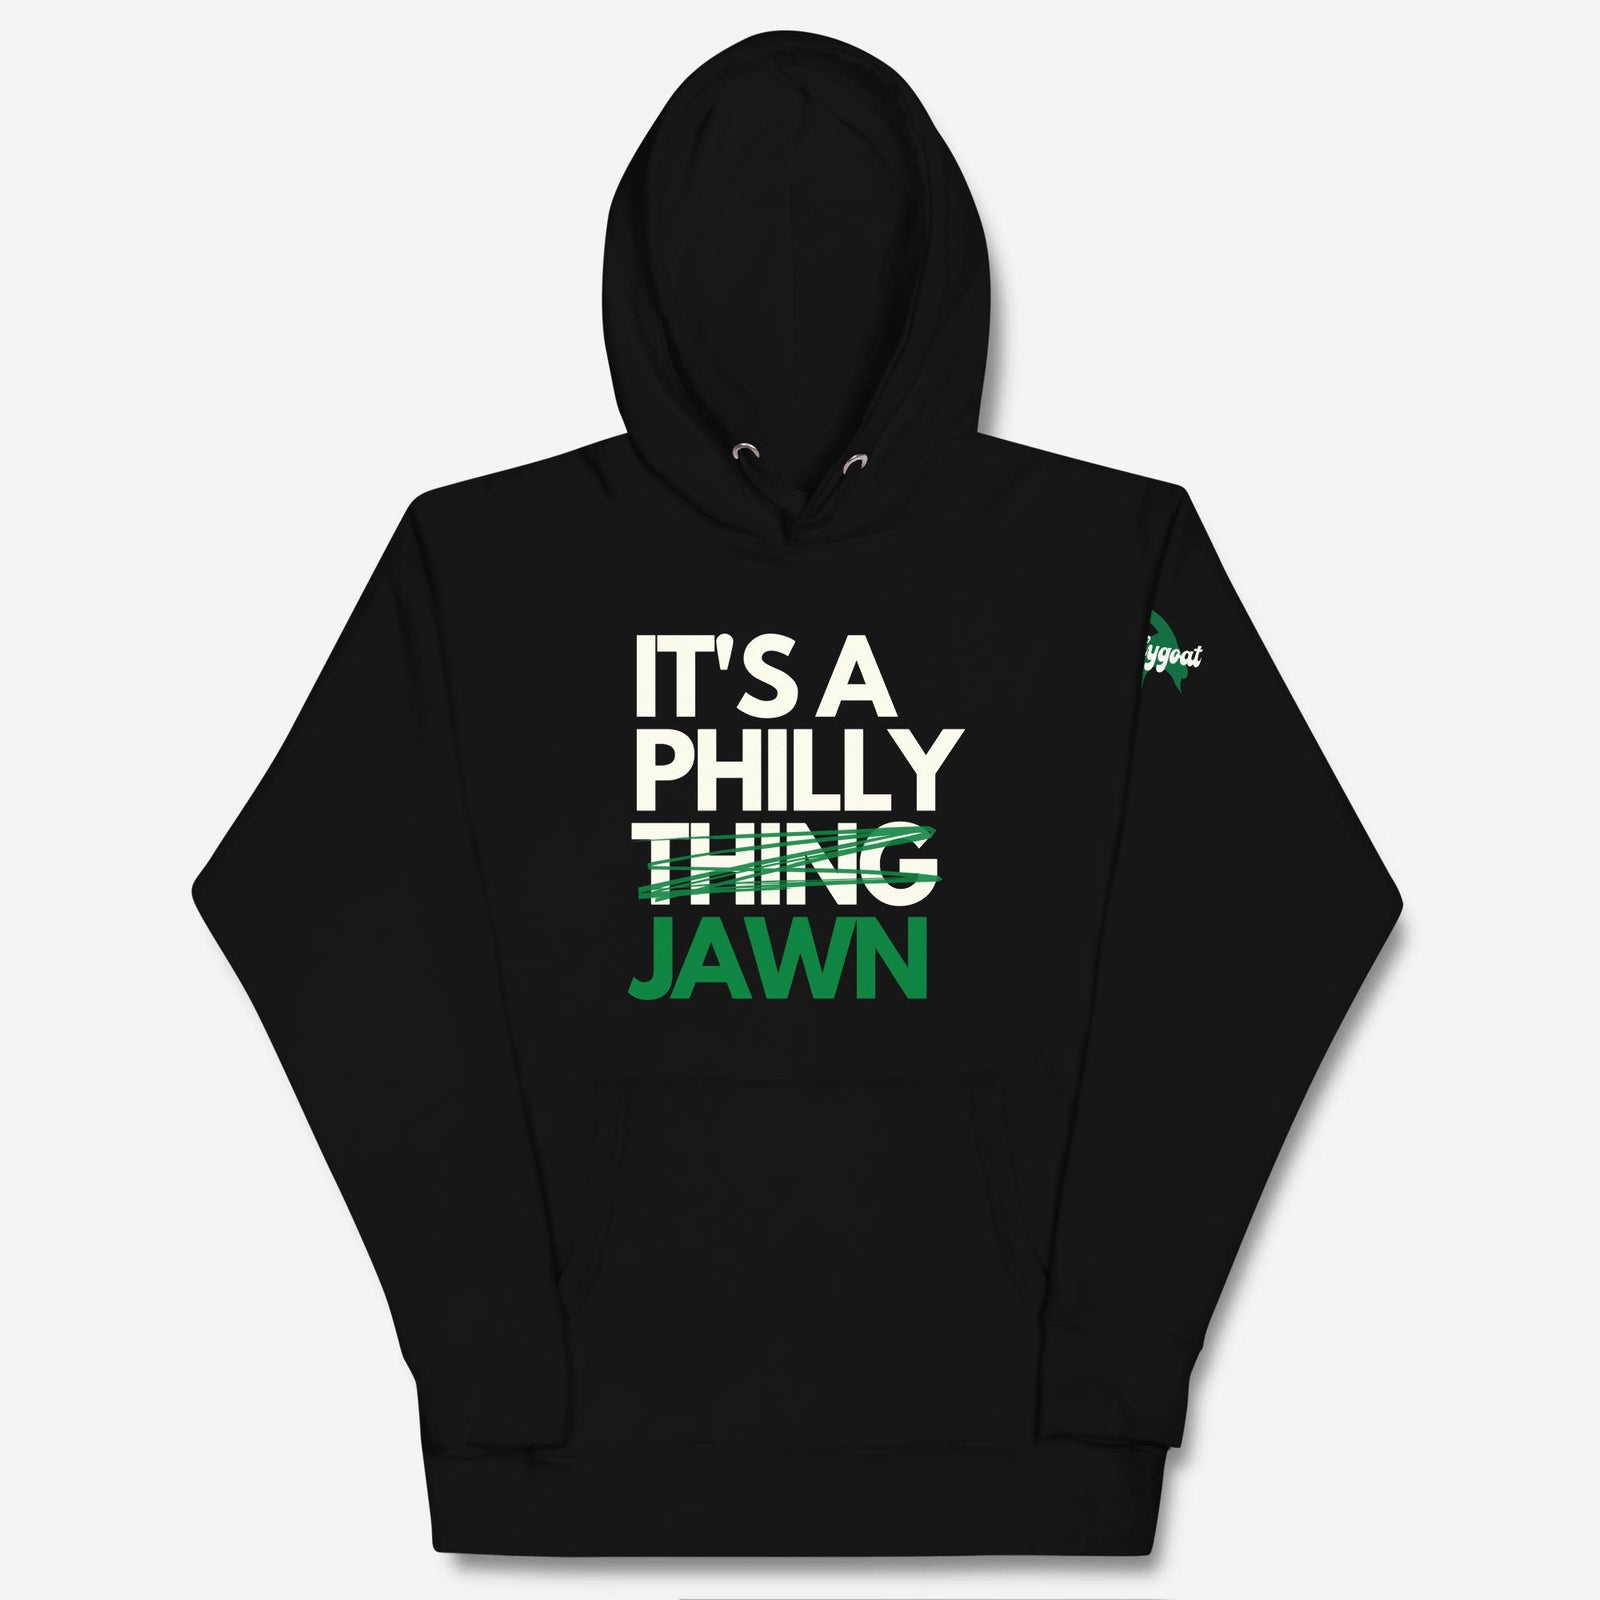 "It's a Philly Jawn" Hoodie